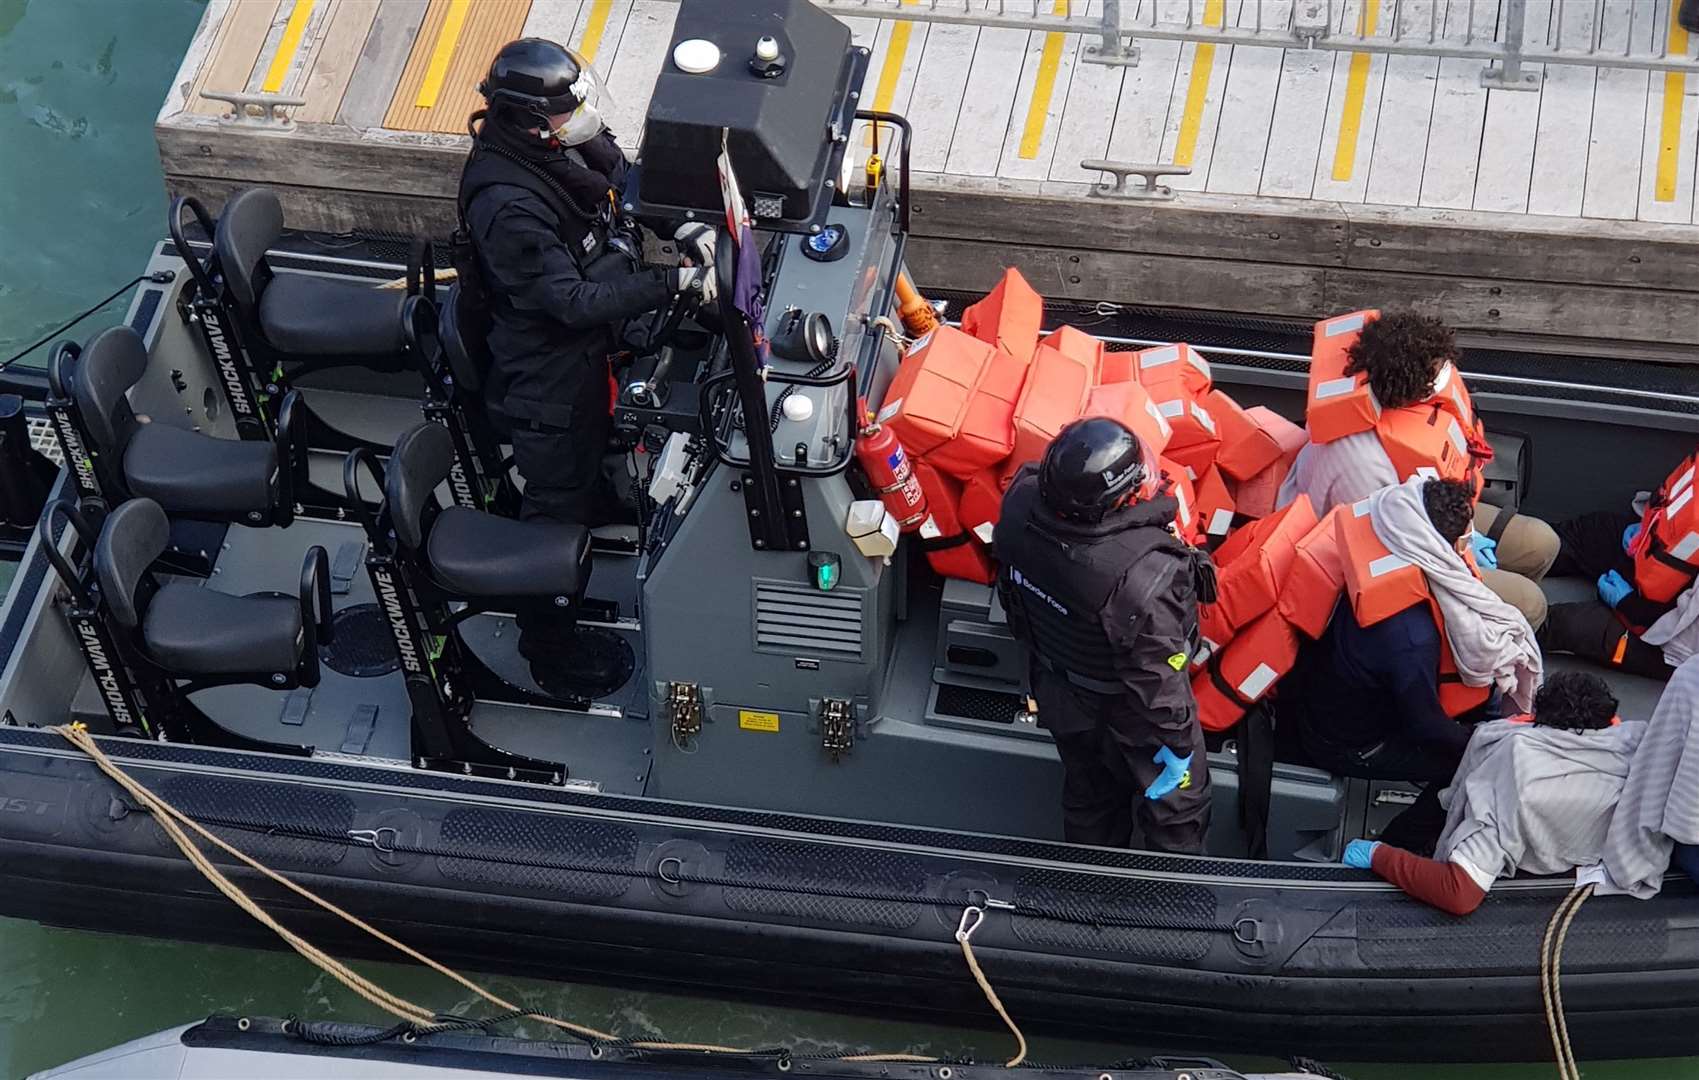 The boat was brought to shore by Border Force officials